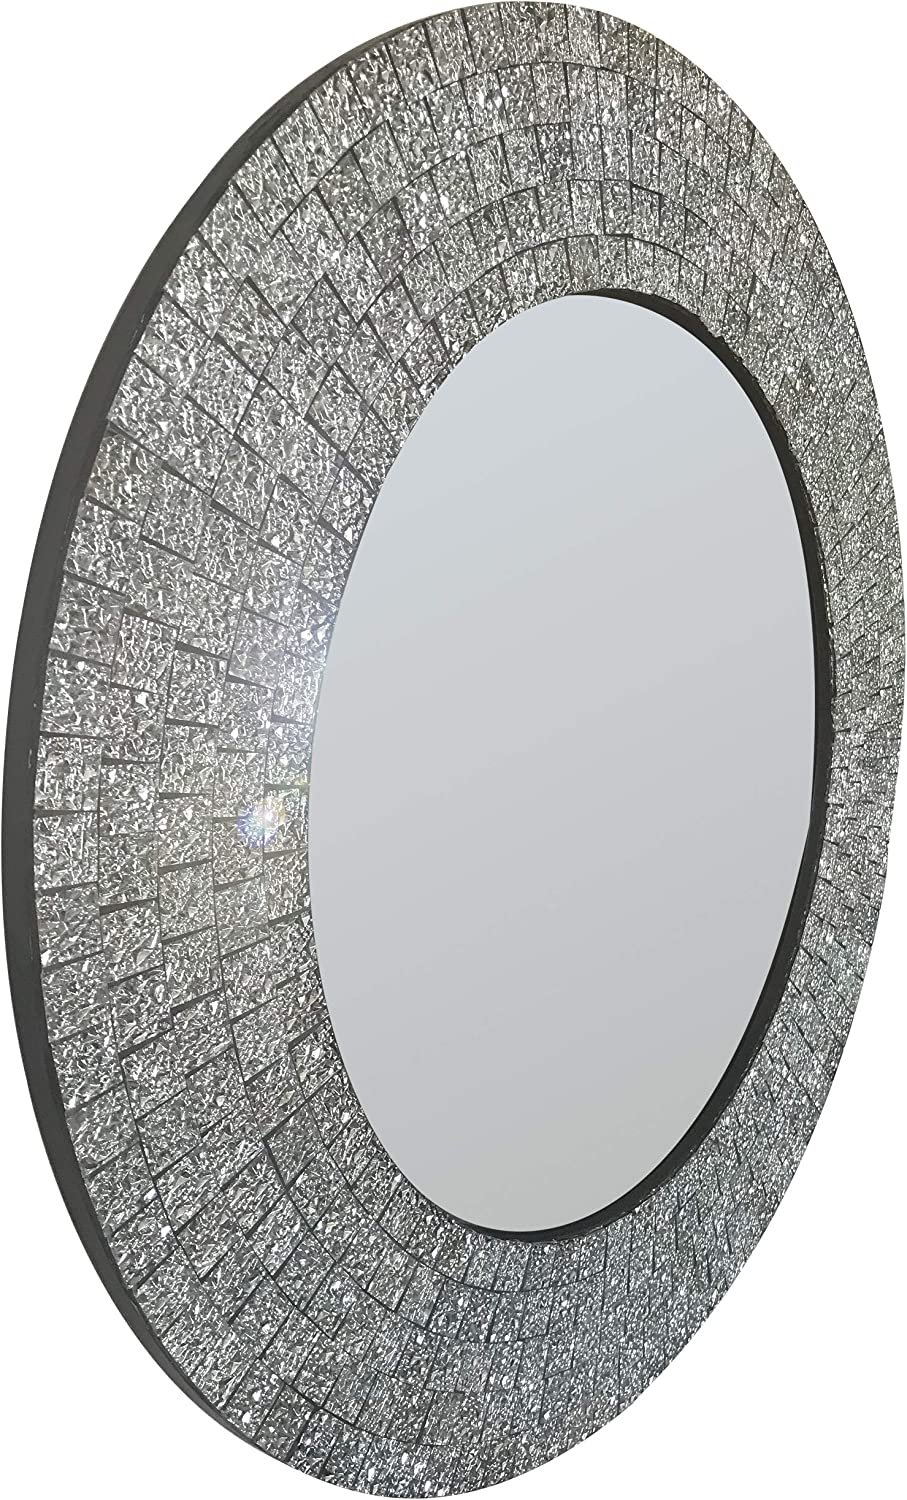 DecorShore 24 in. Glamorous Sparkling Glass Mosaic Wall Mirror Home Decor in Effervescent Silver - 2